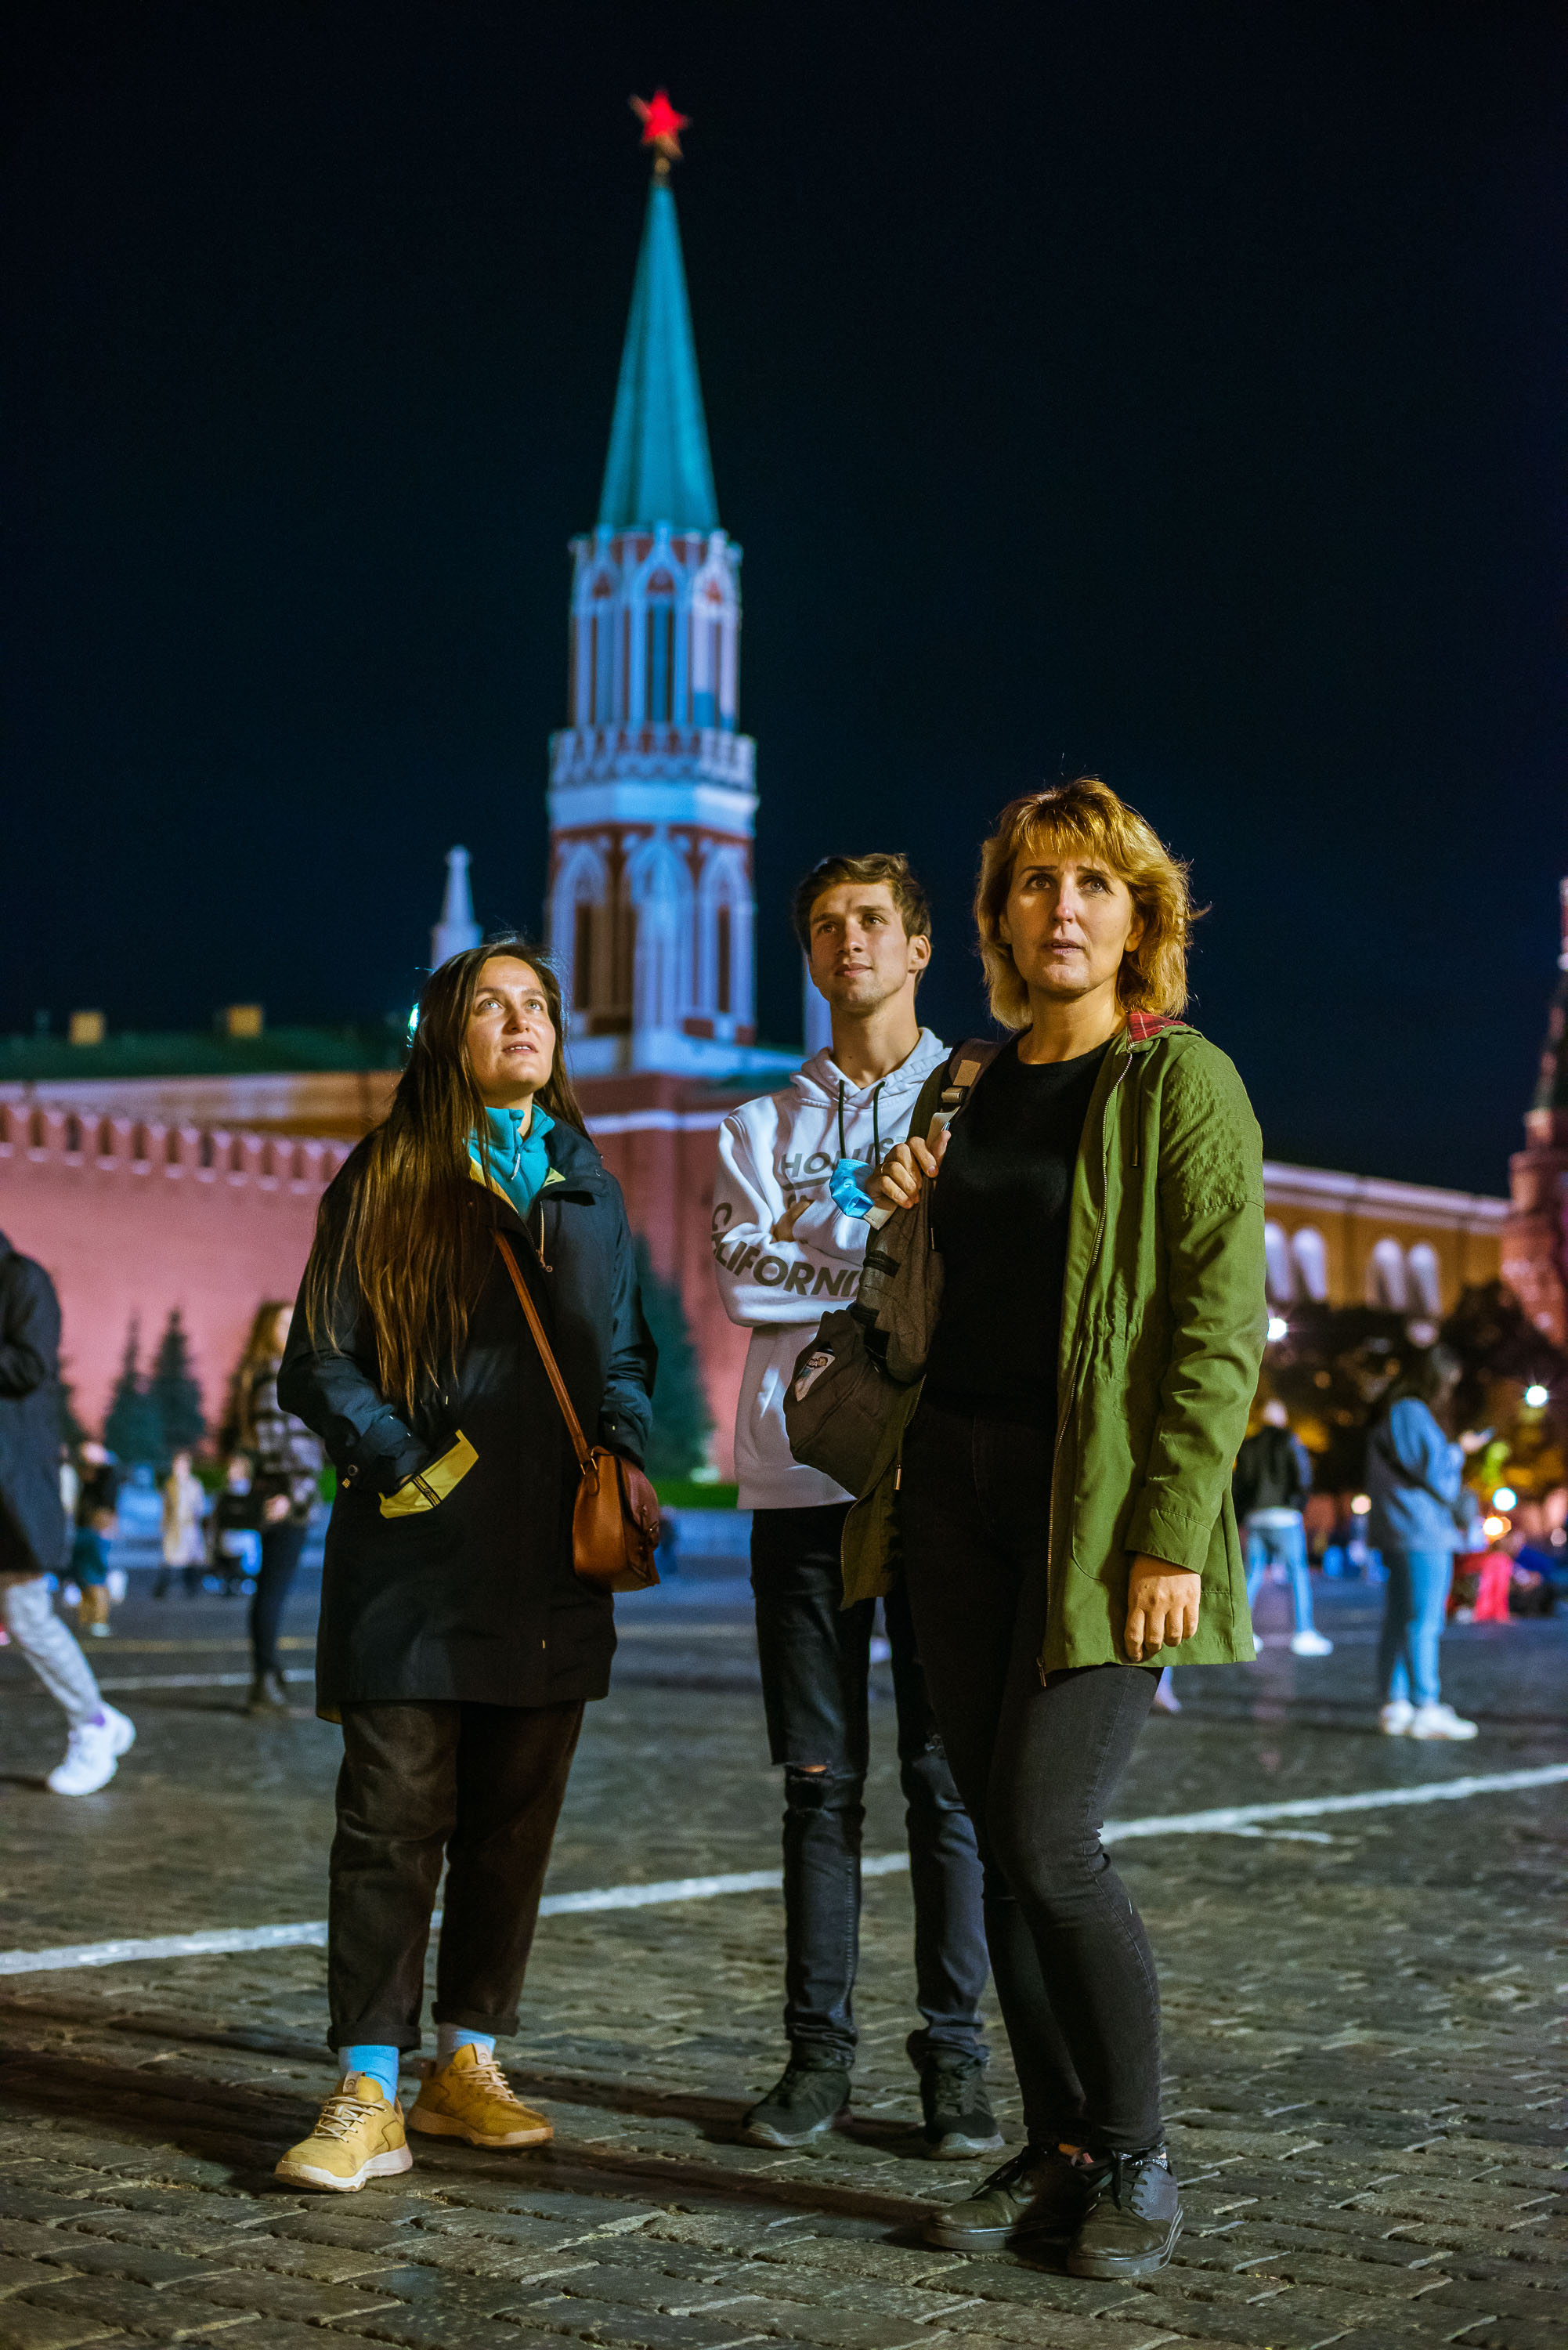 Russians in the Red Square